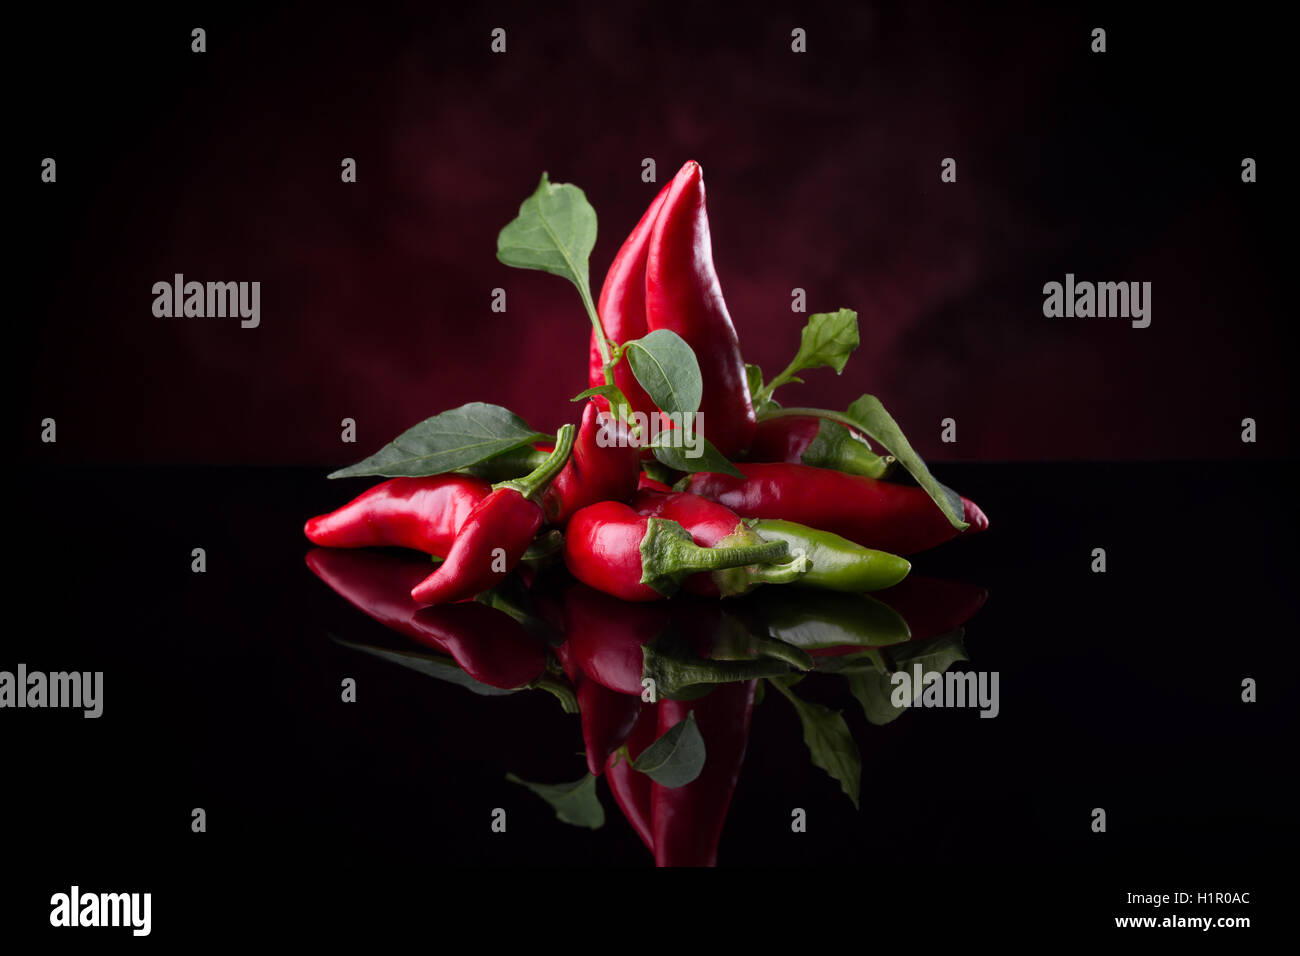 red chili peppers on the black background. Stock Photo